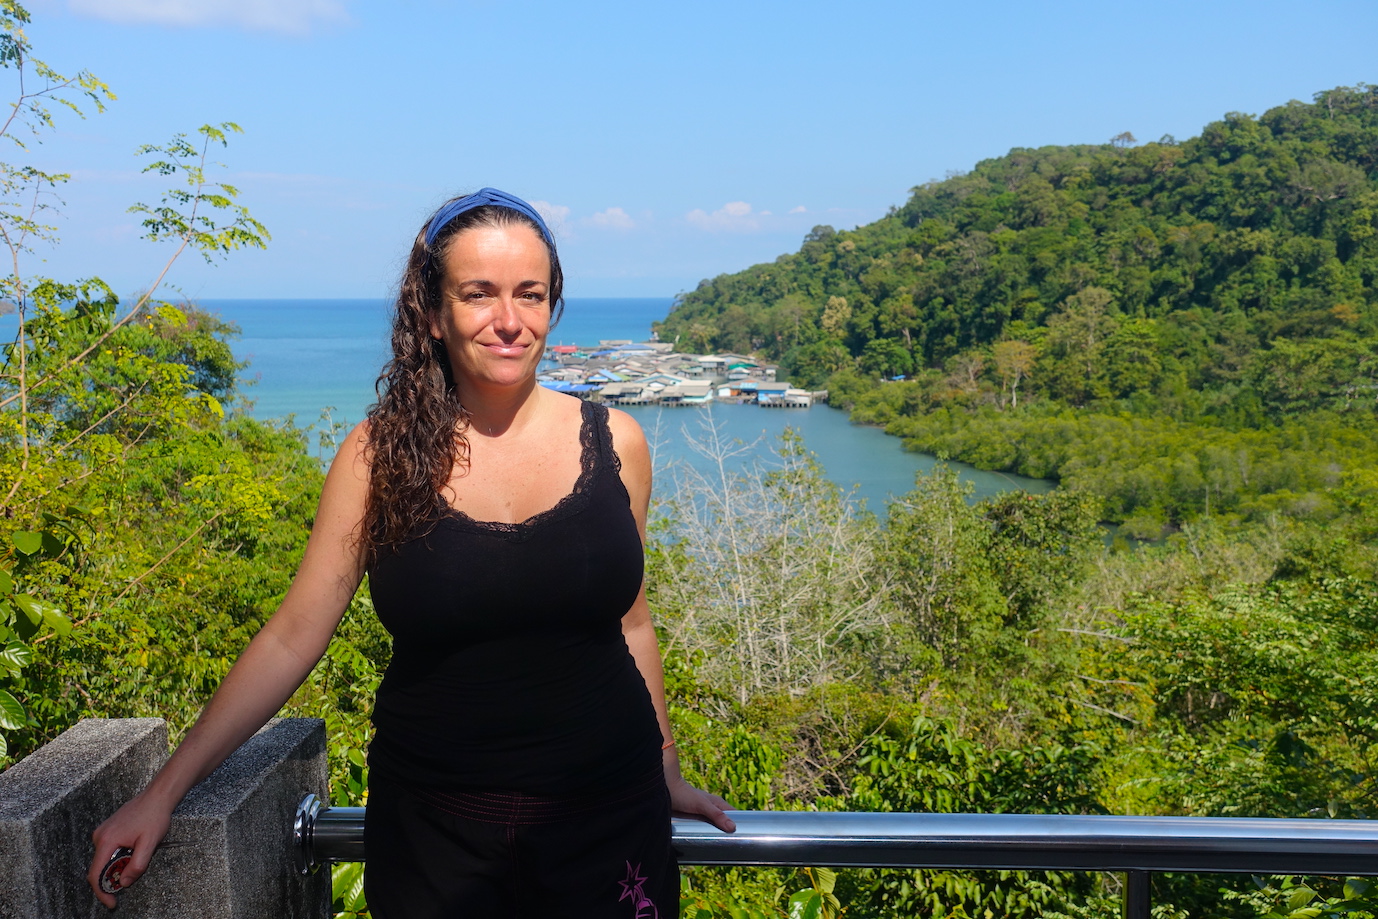 Pilar at the view point on the way to Ao Yai fishing village in Koh Kood